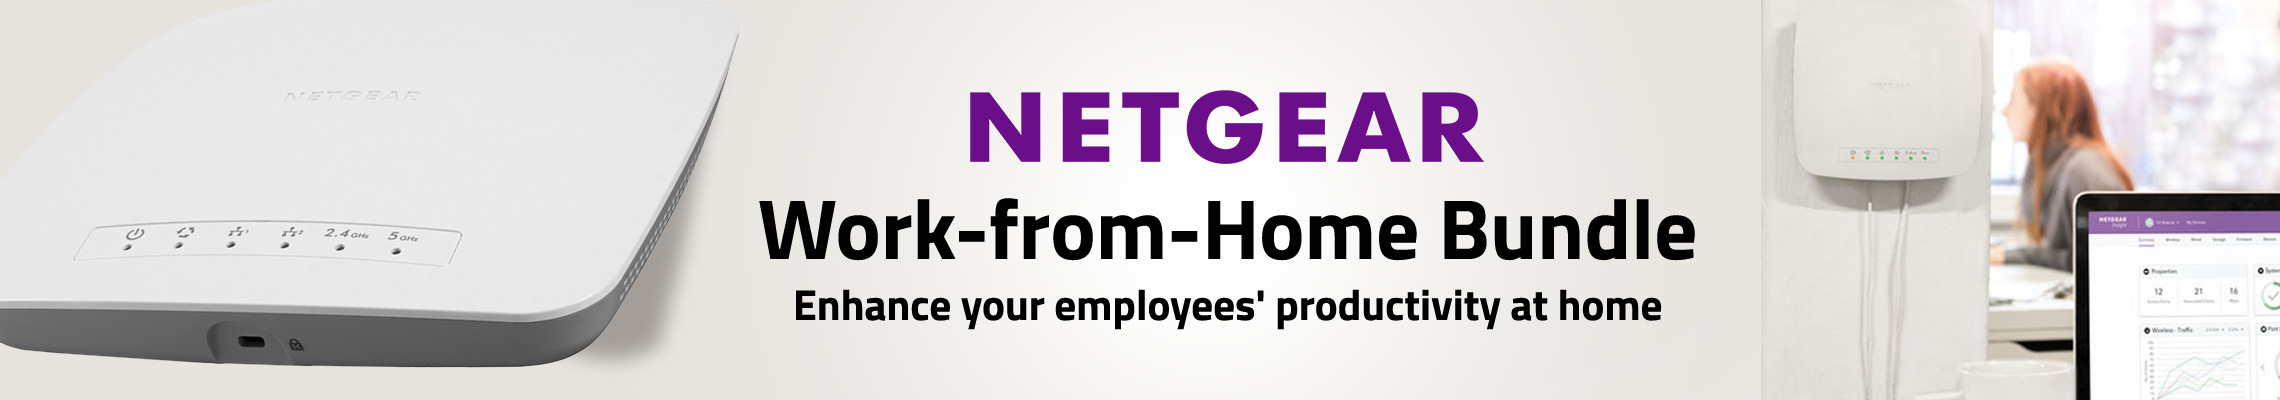 NETGEAR Work-from-Home Bundle enhances your emplyees' productivity at home